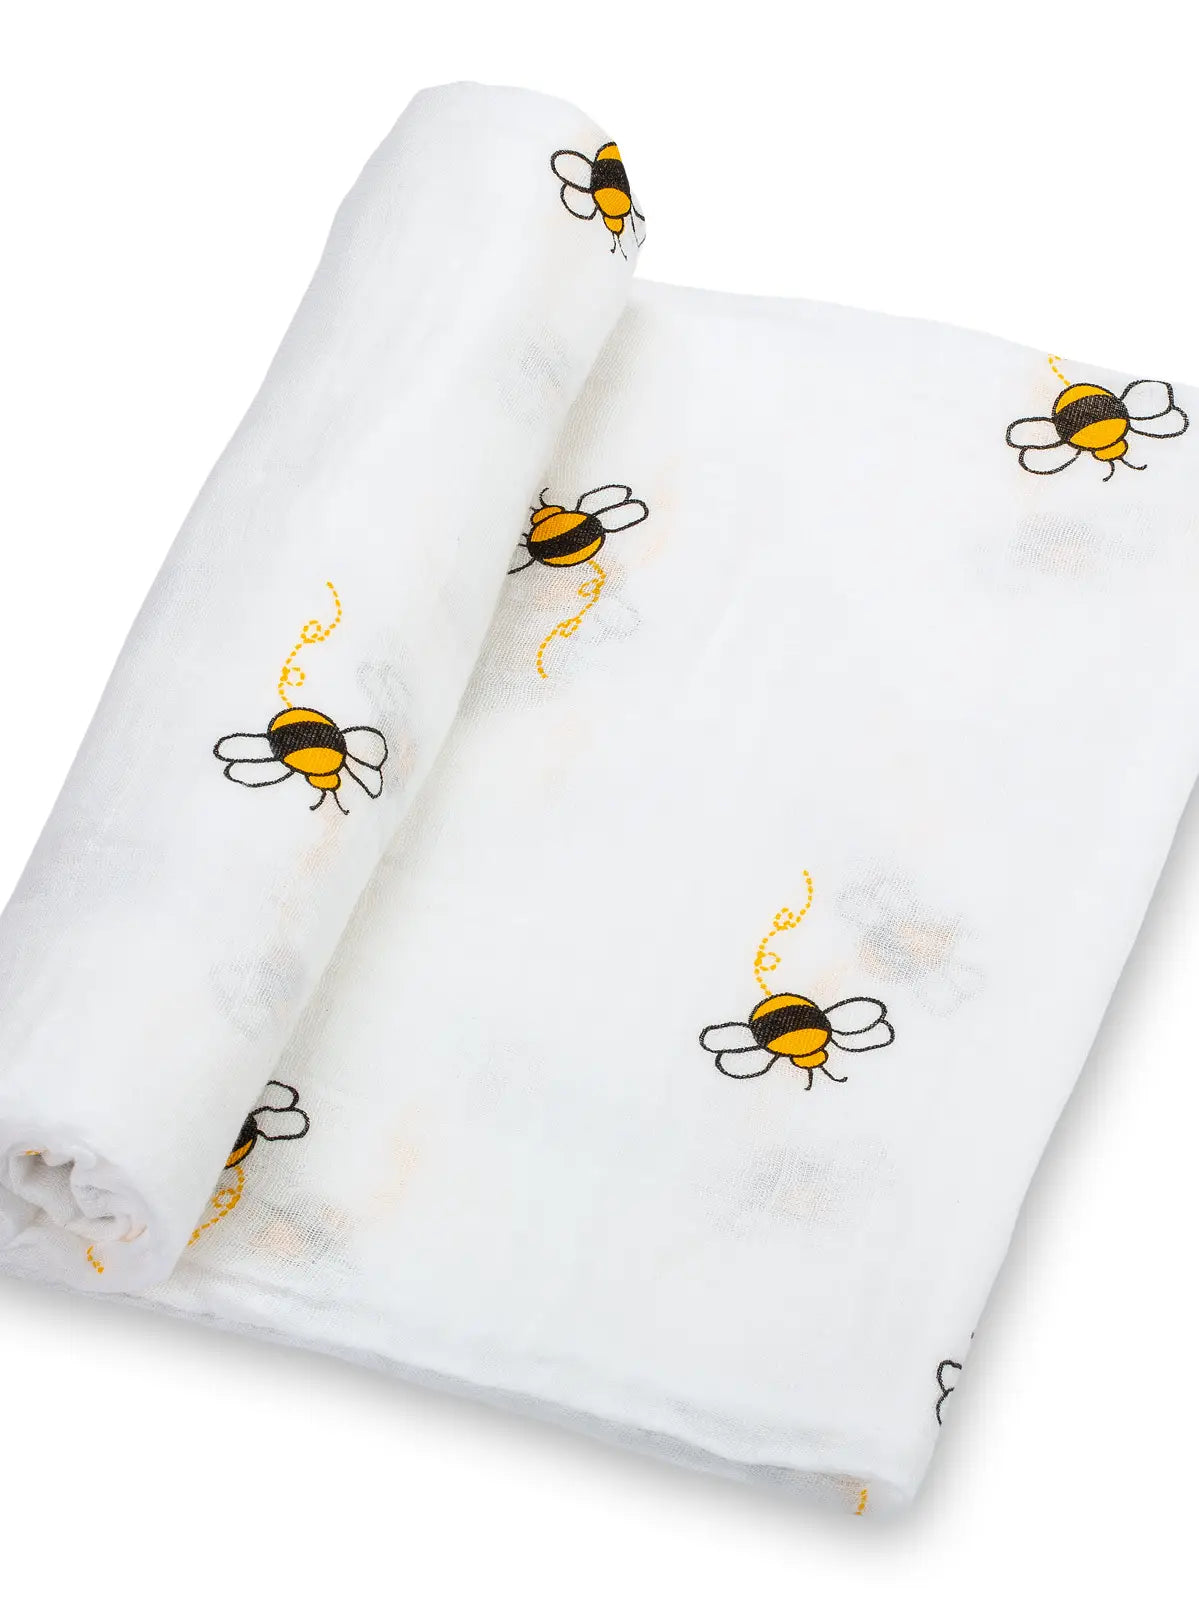 LollyBanks Swaddle Blanket + More Options